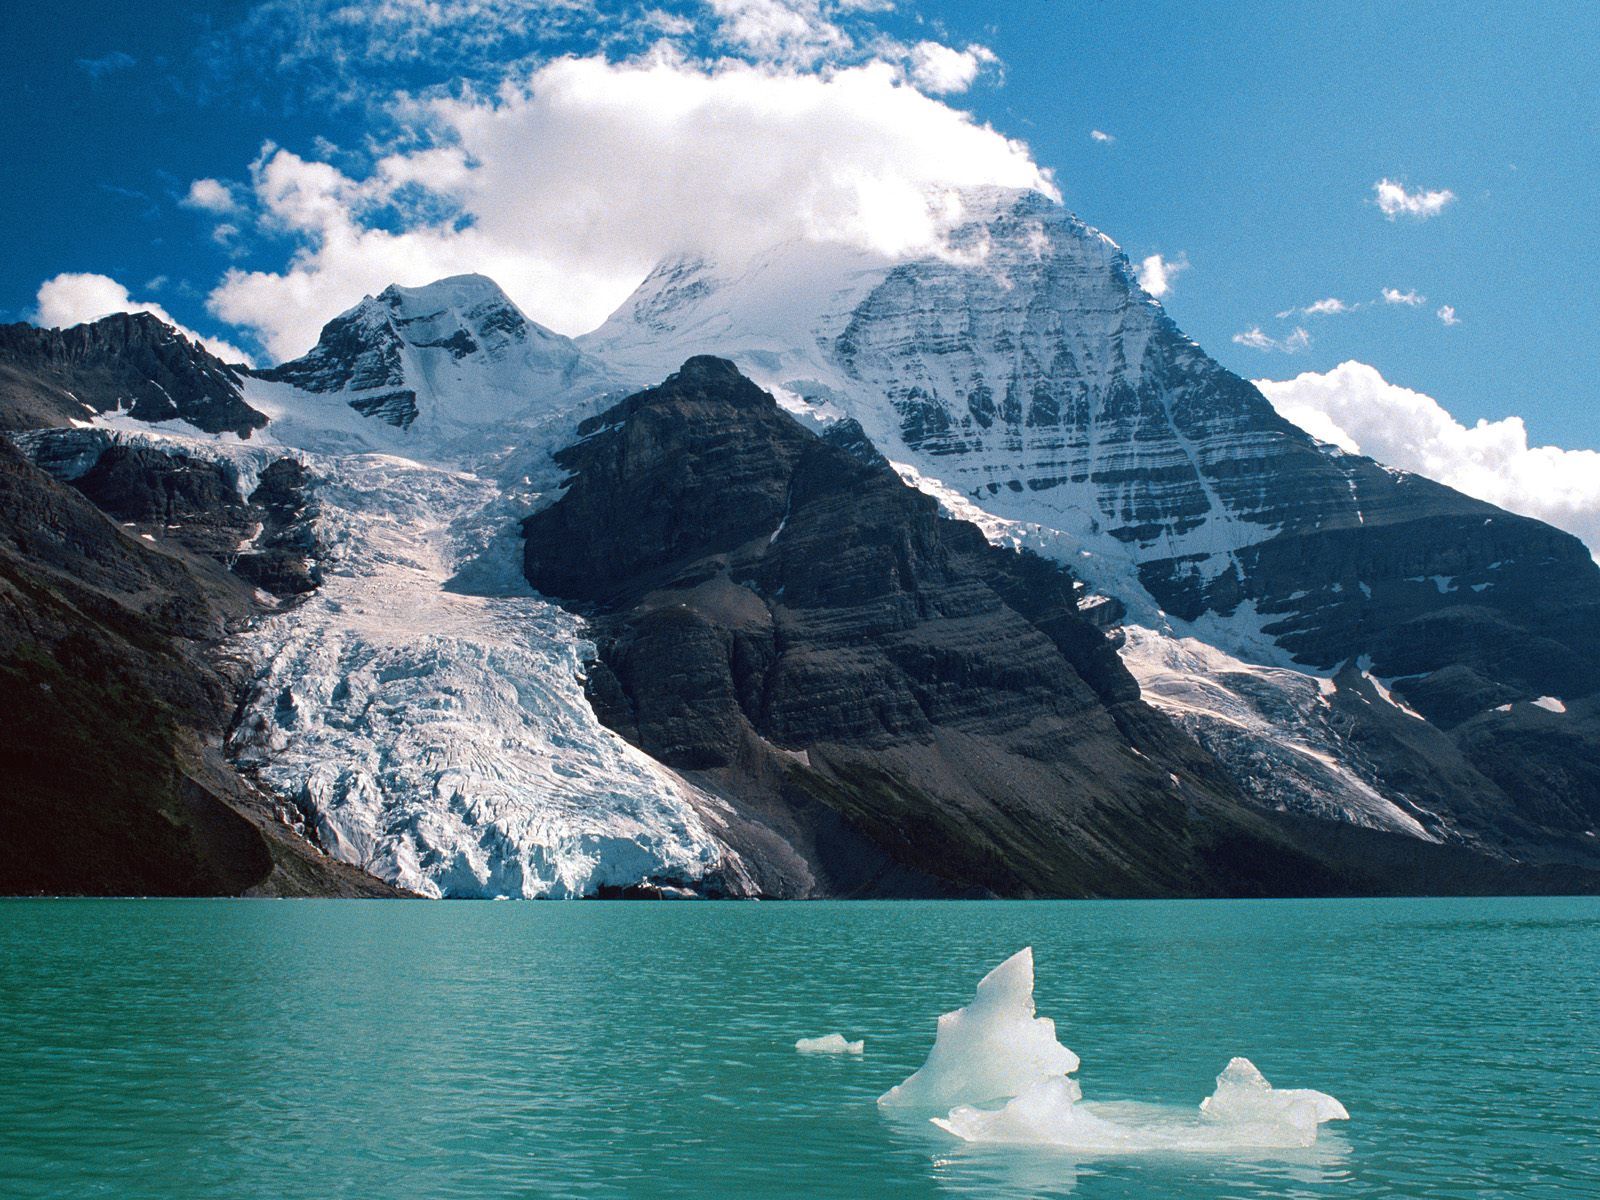 glacier, clouds, mountains, nature, snow, lake, height, day